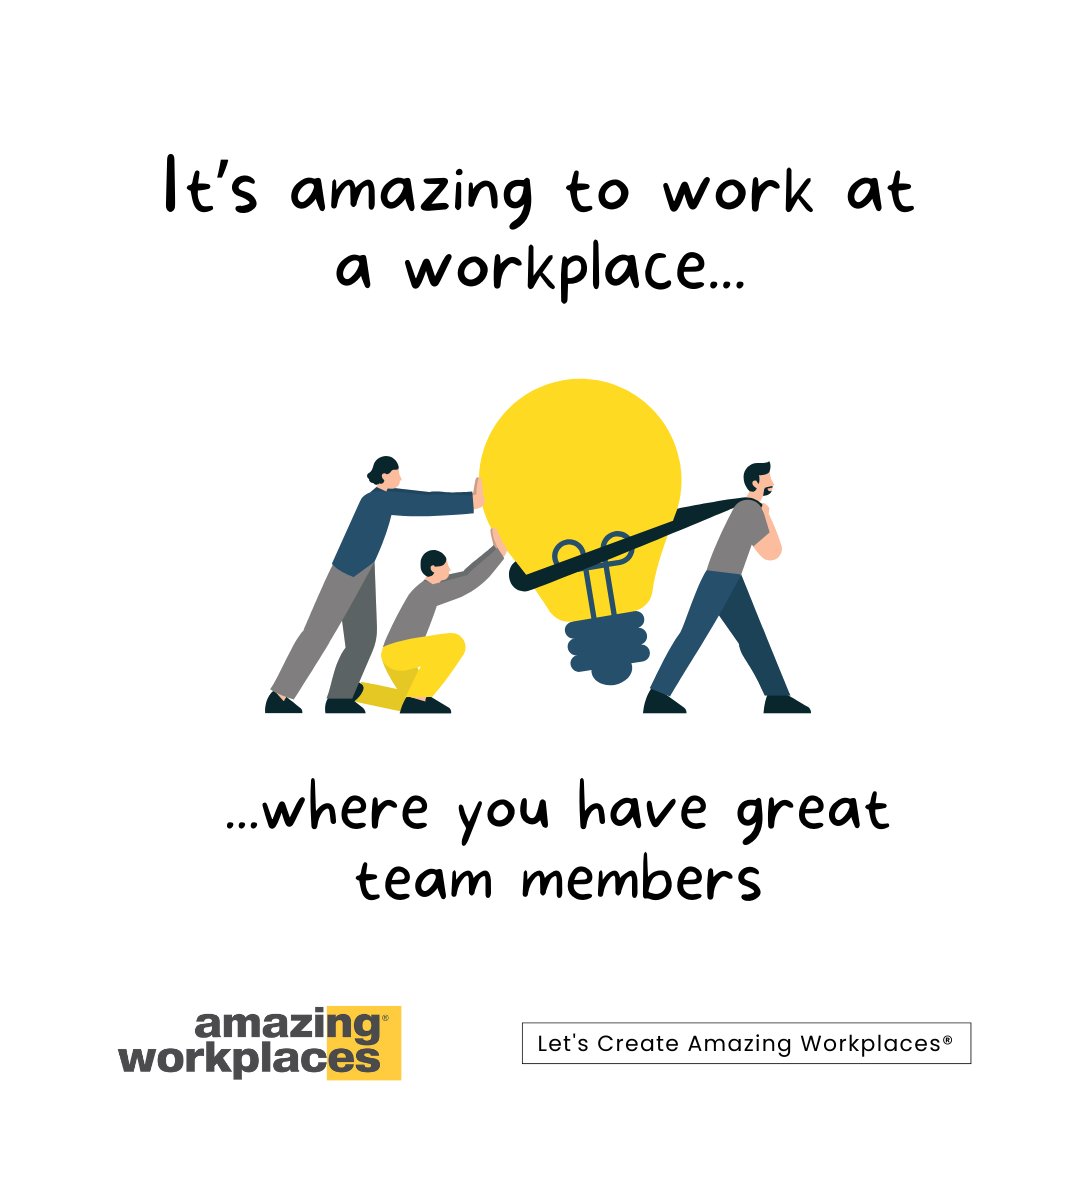 Working at a place with awesome team members is a total blast! It also help keep the stress levels down, making the daily grind feel more like a fun and rewarding journey.
#amazingworkplaces #letscreateamazingworkplaces #team #teamwork #winningteam